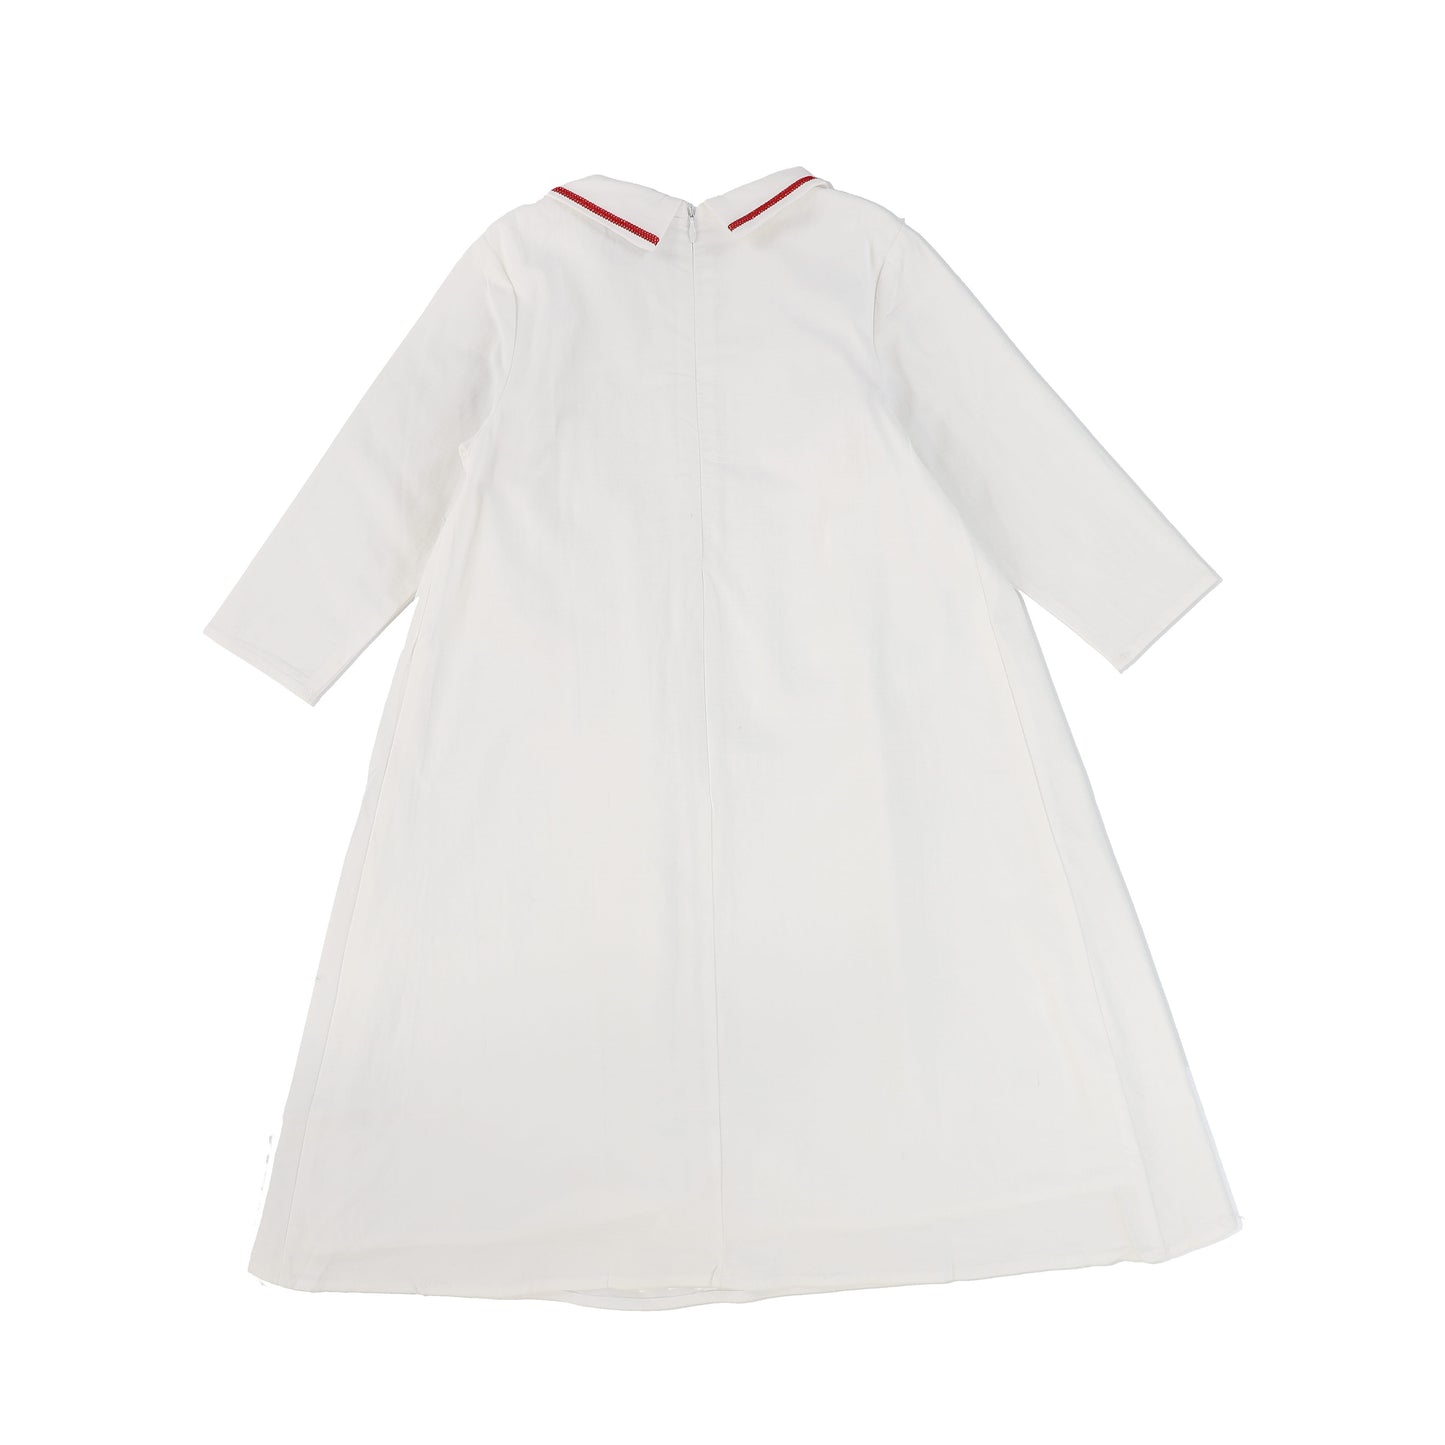 BACE COLLECTION WHITE SMOCKED COLLAR DRESS [FINAL SALE]